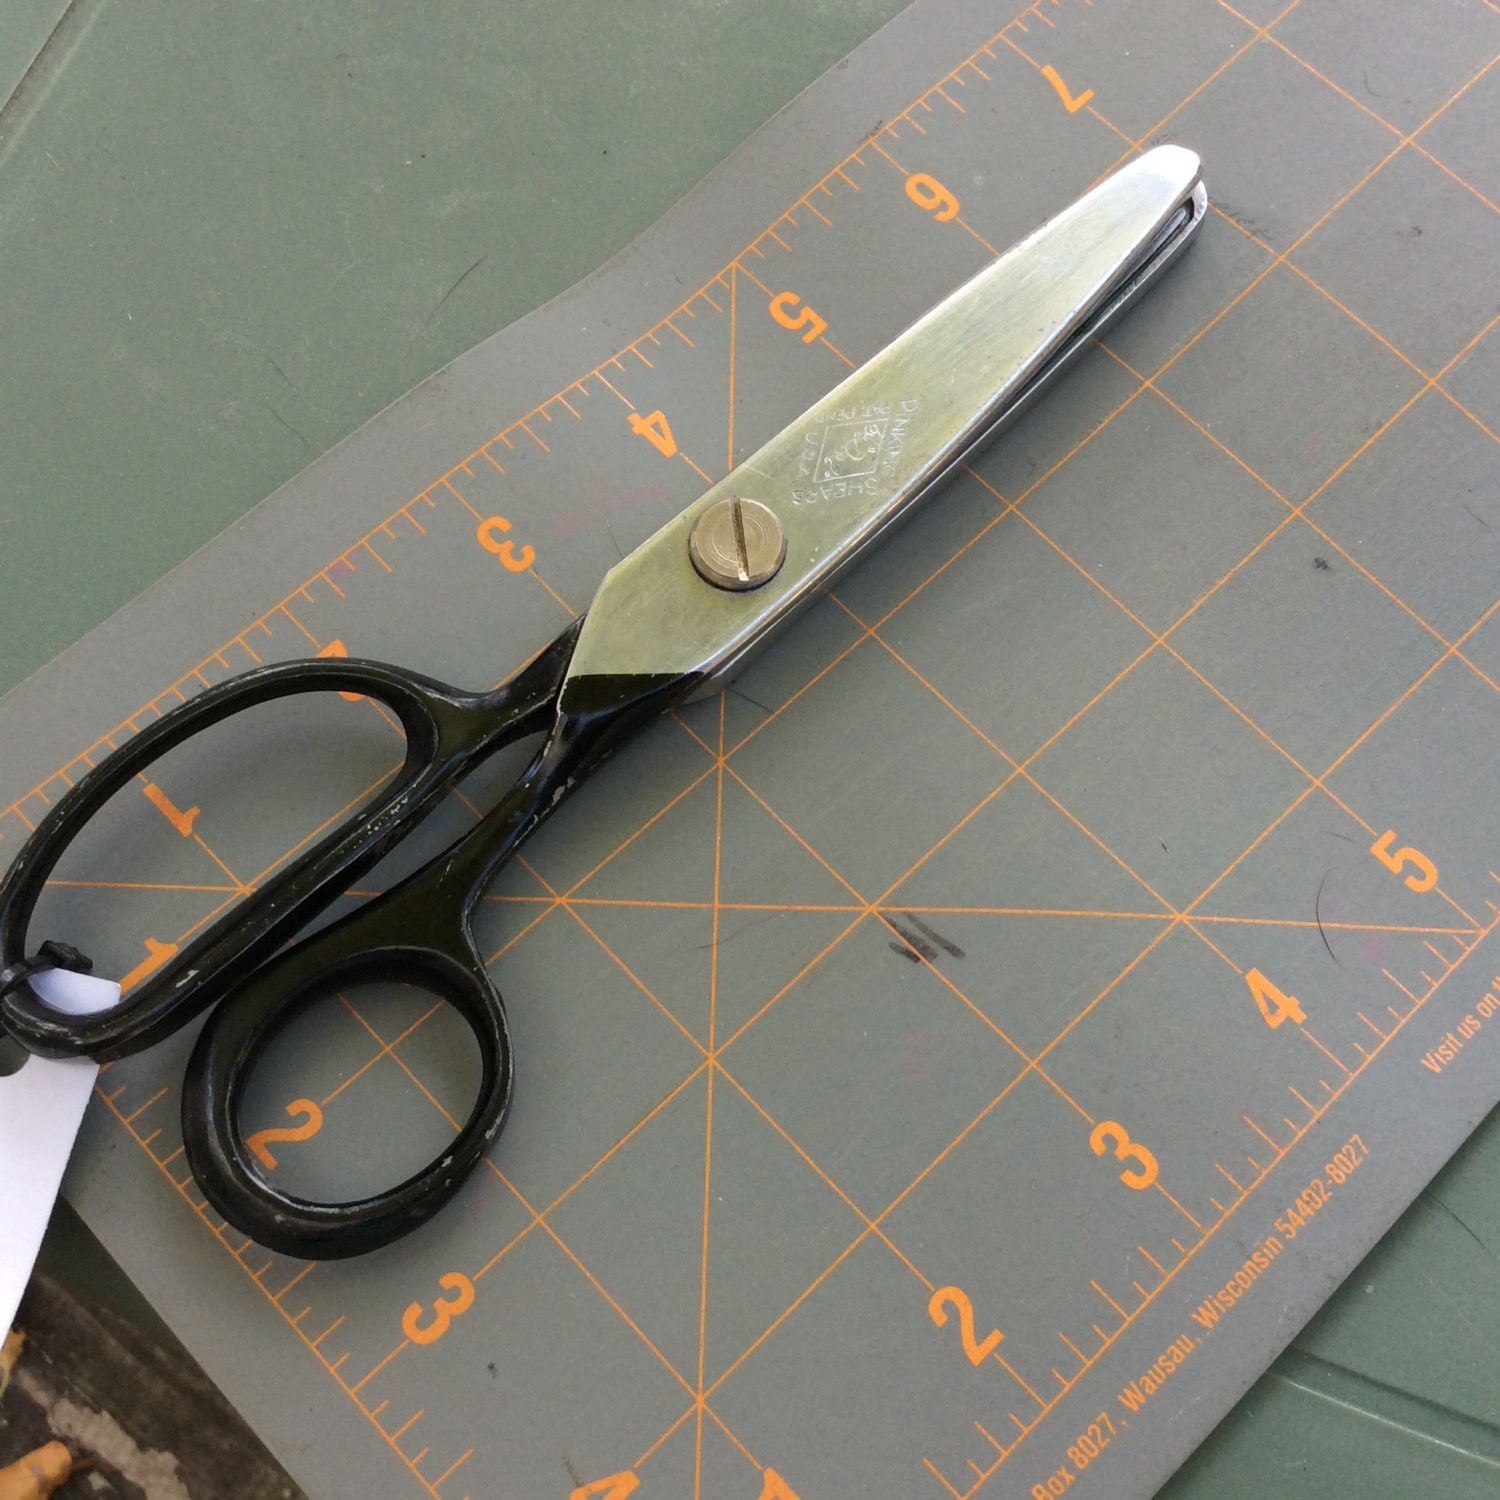 Good quality Pinking shears 9 inch tailoring fabric shears lace